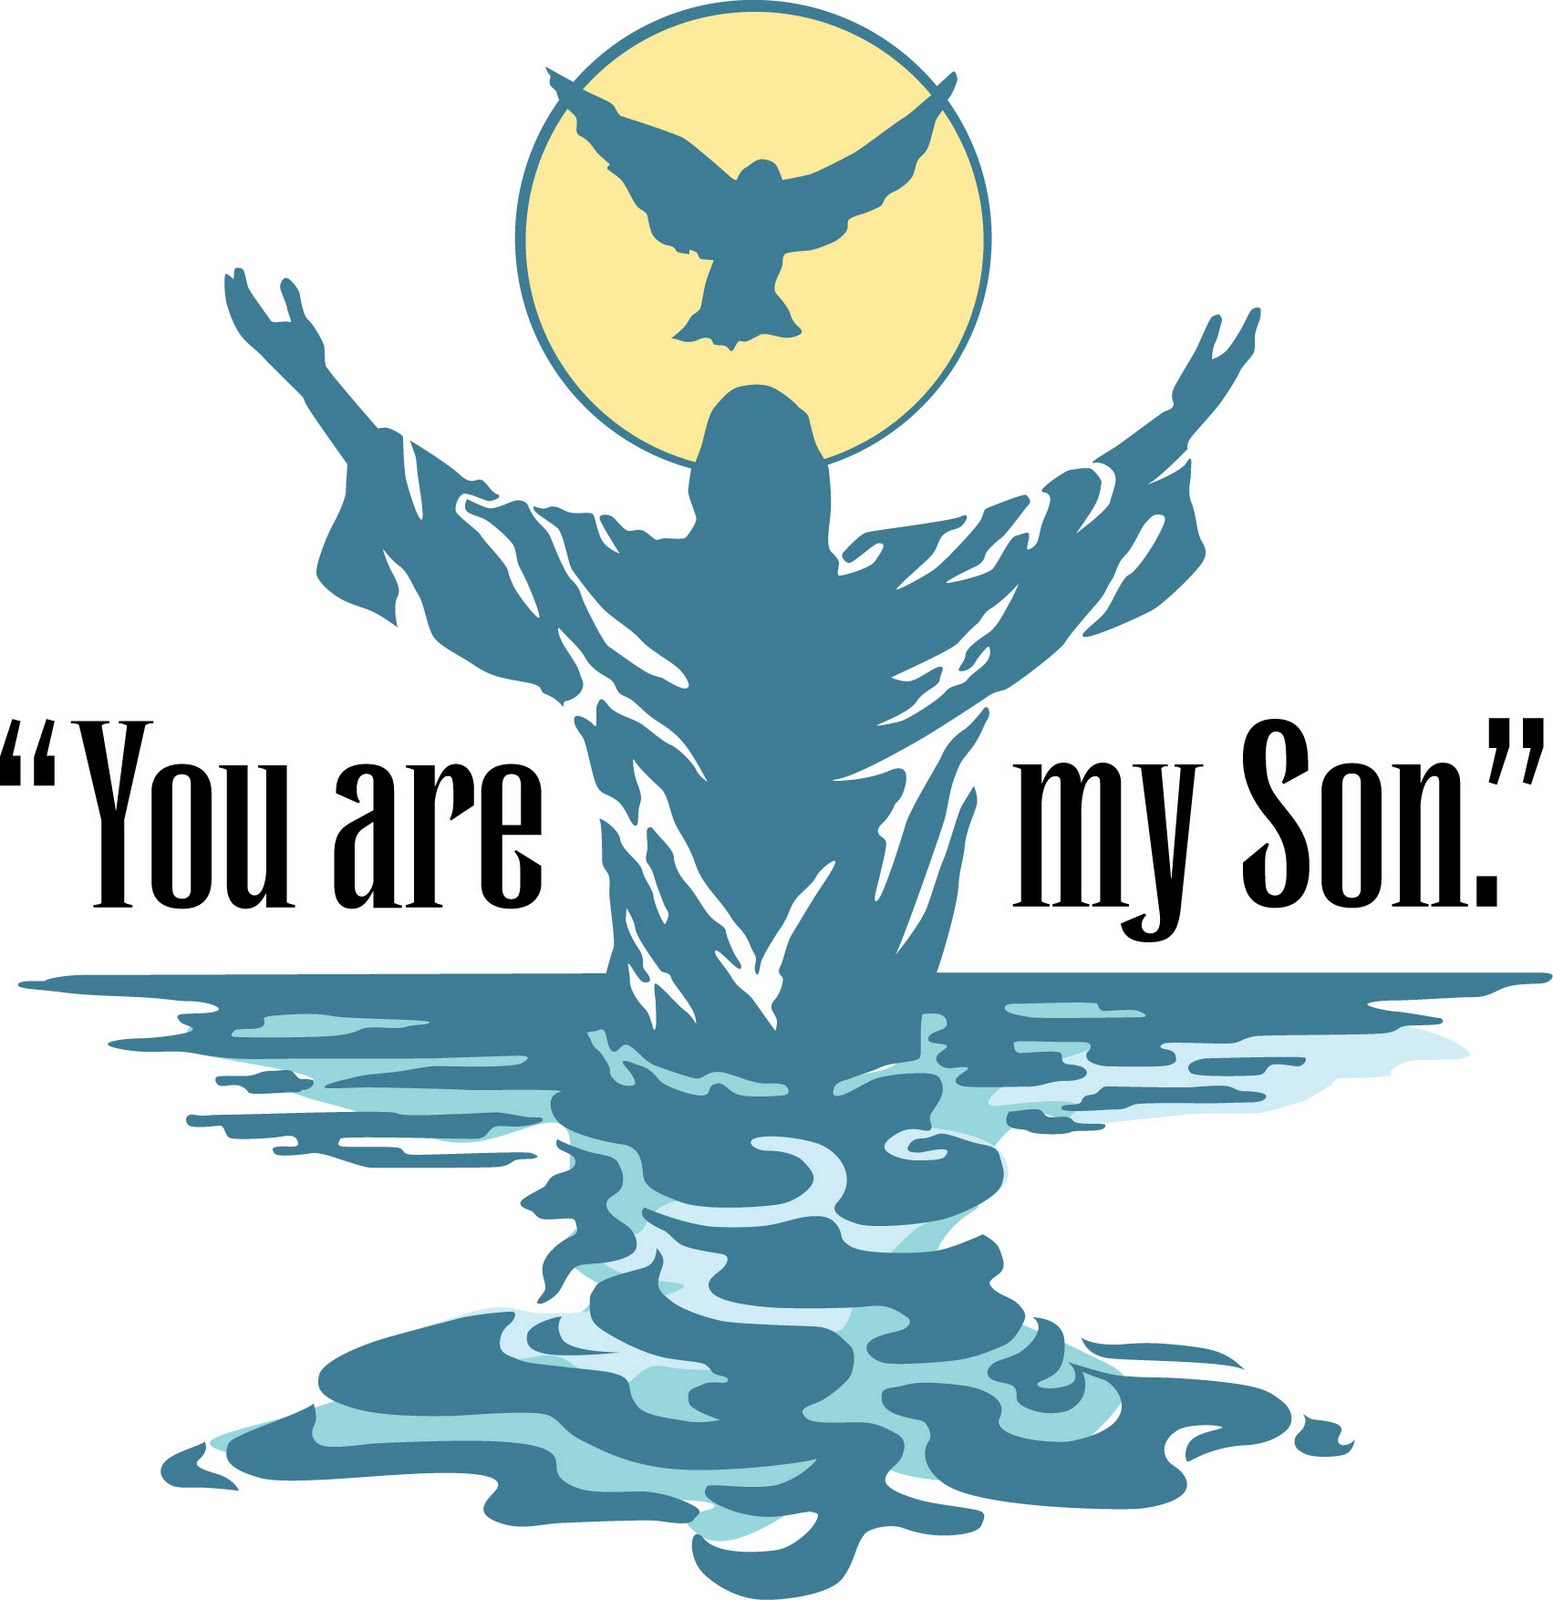 baptism of the lord clipart - photo #2